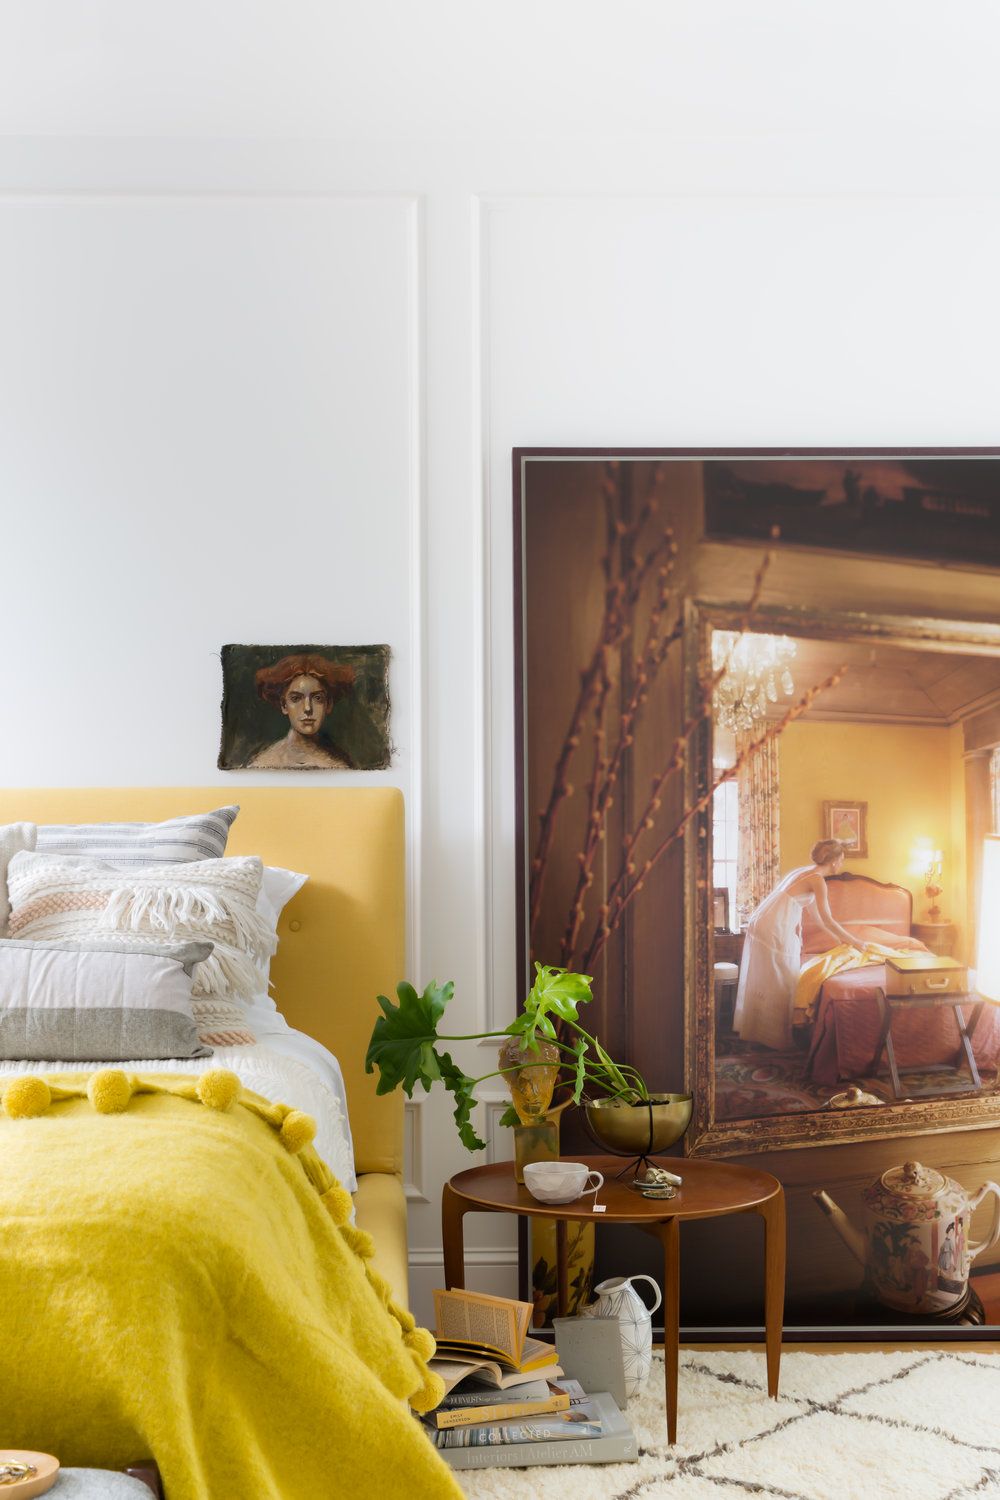 15 Cheerful Yellow Bedrooms - Chic Ideas for Yellow Bedroom Decor